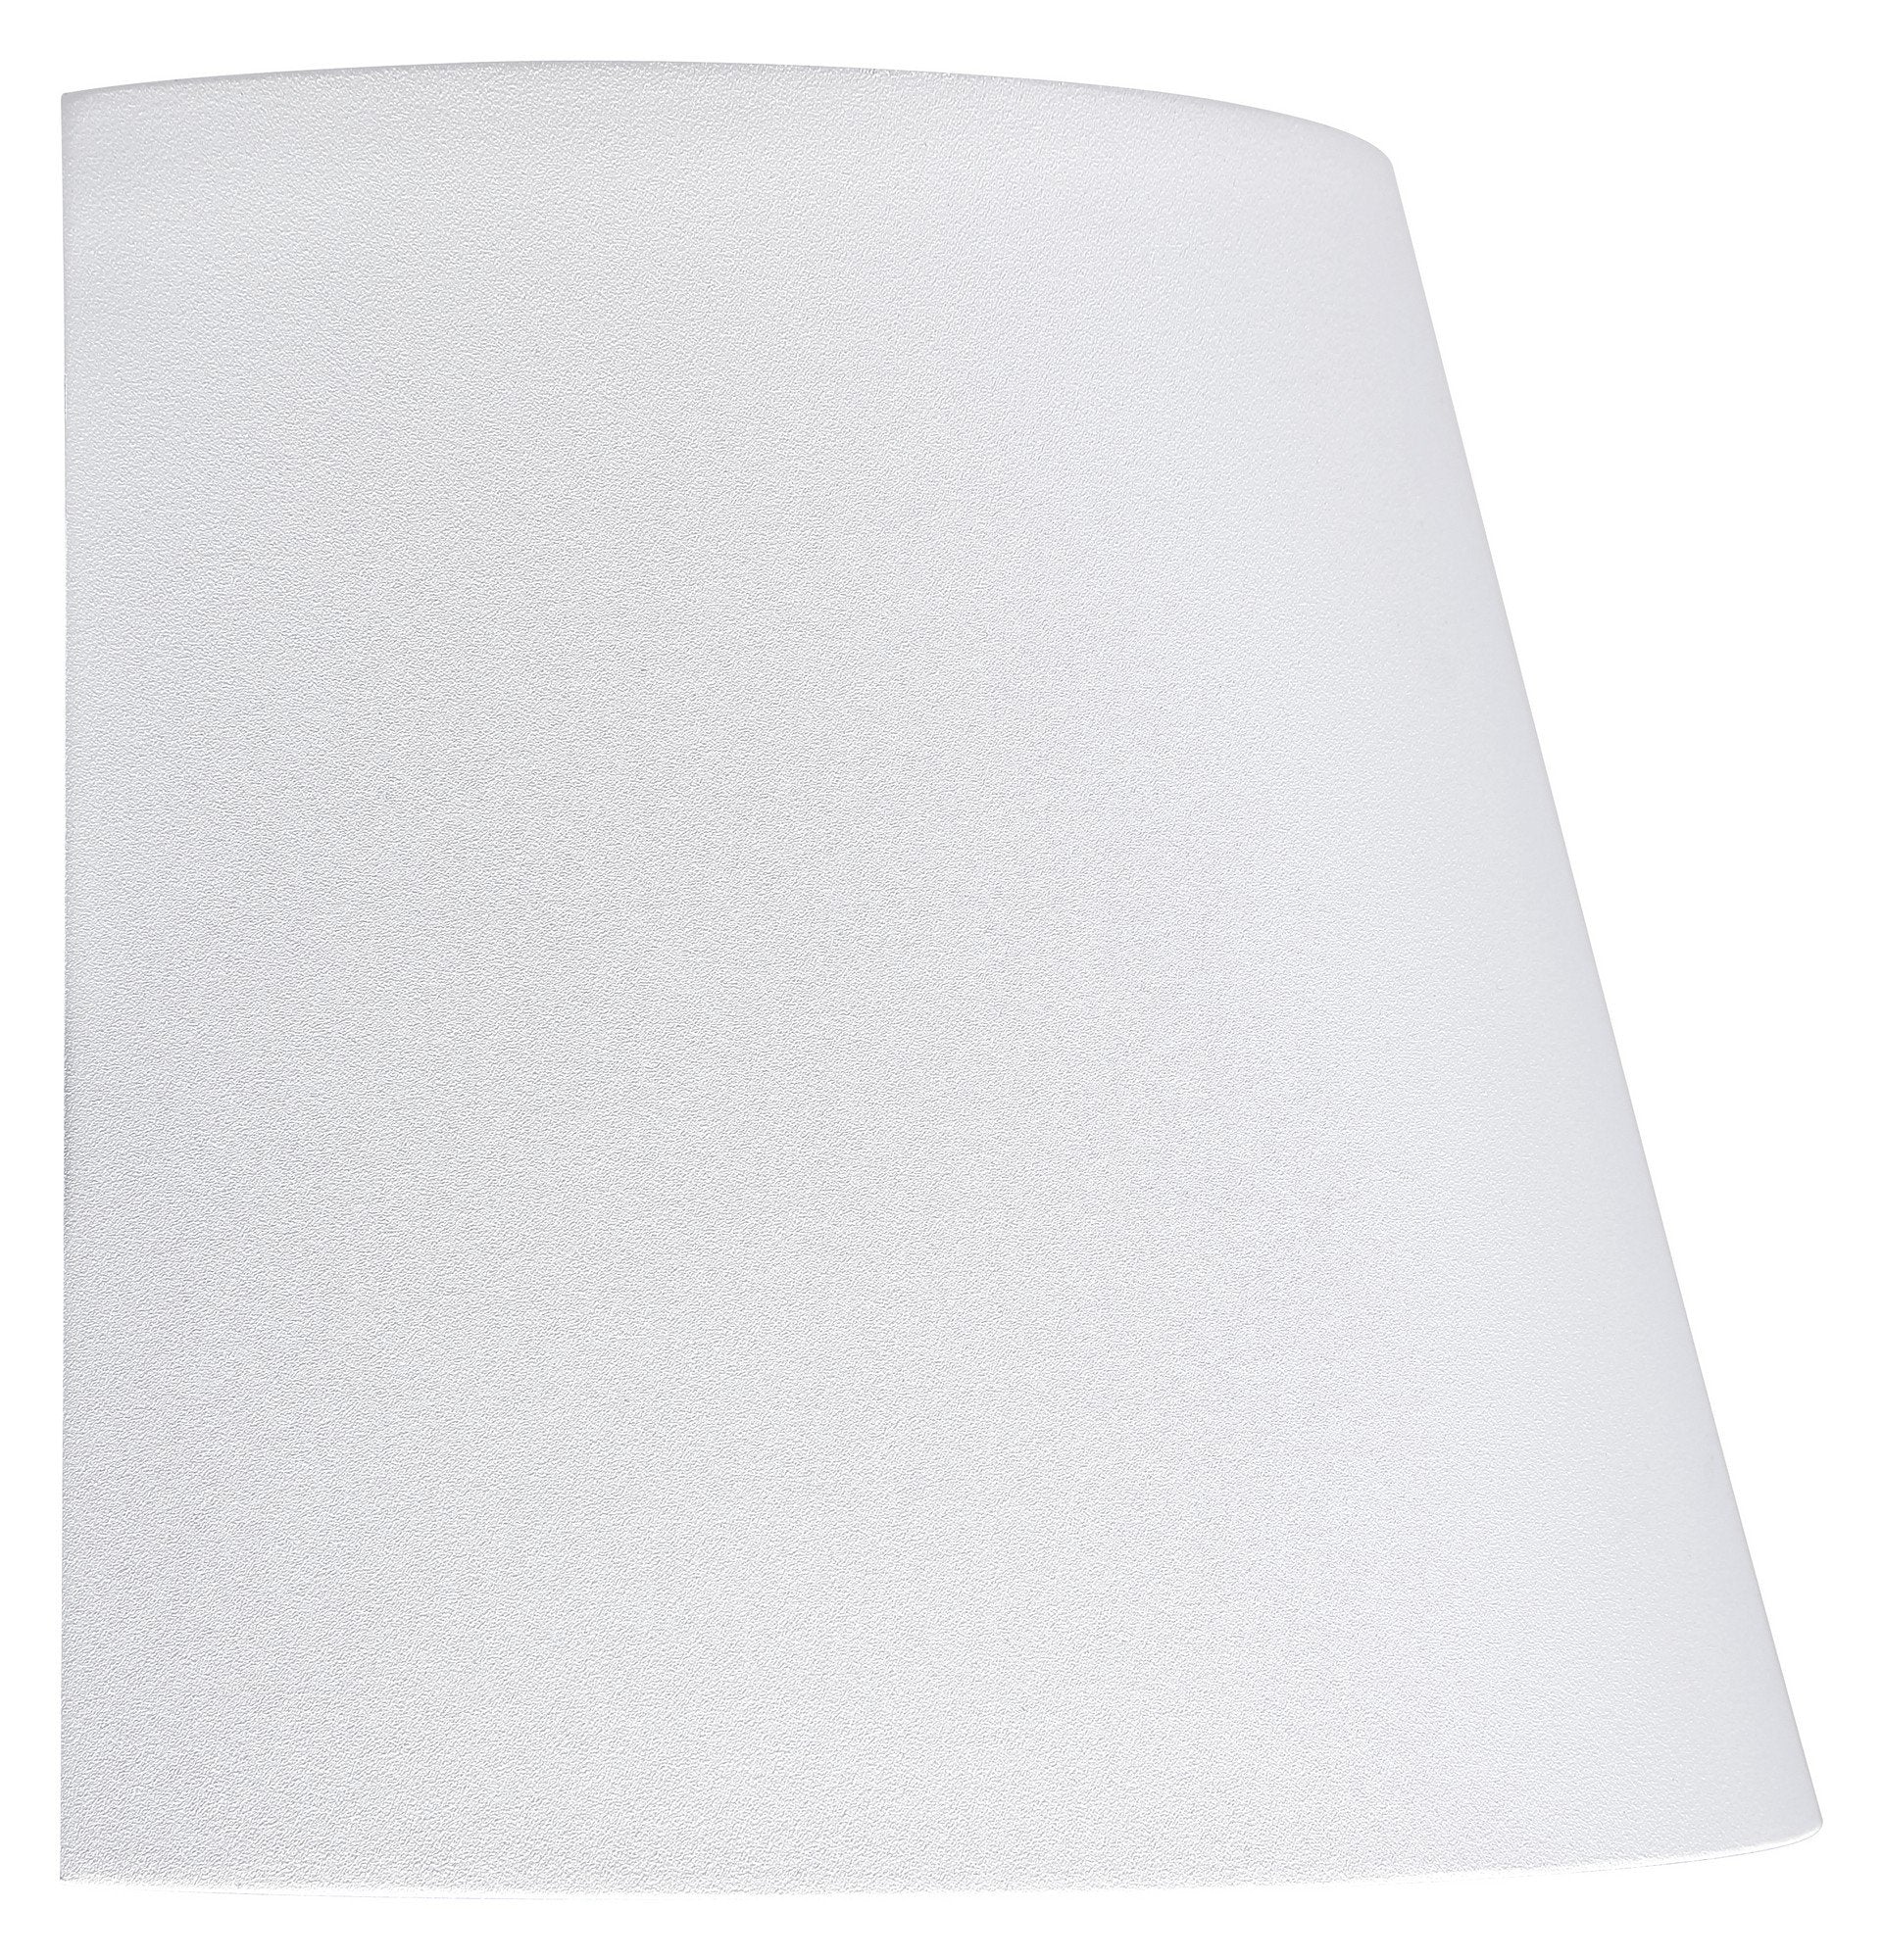 Cone Marine Grade Adjustable Wet Location LED Wallwasher - White (WH) Outdoor Access Lighting 